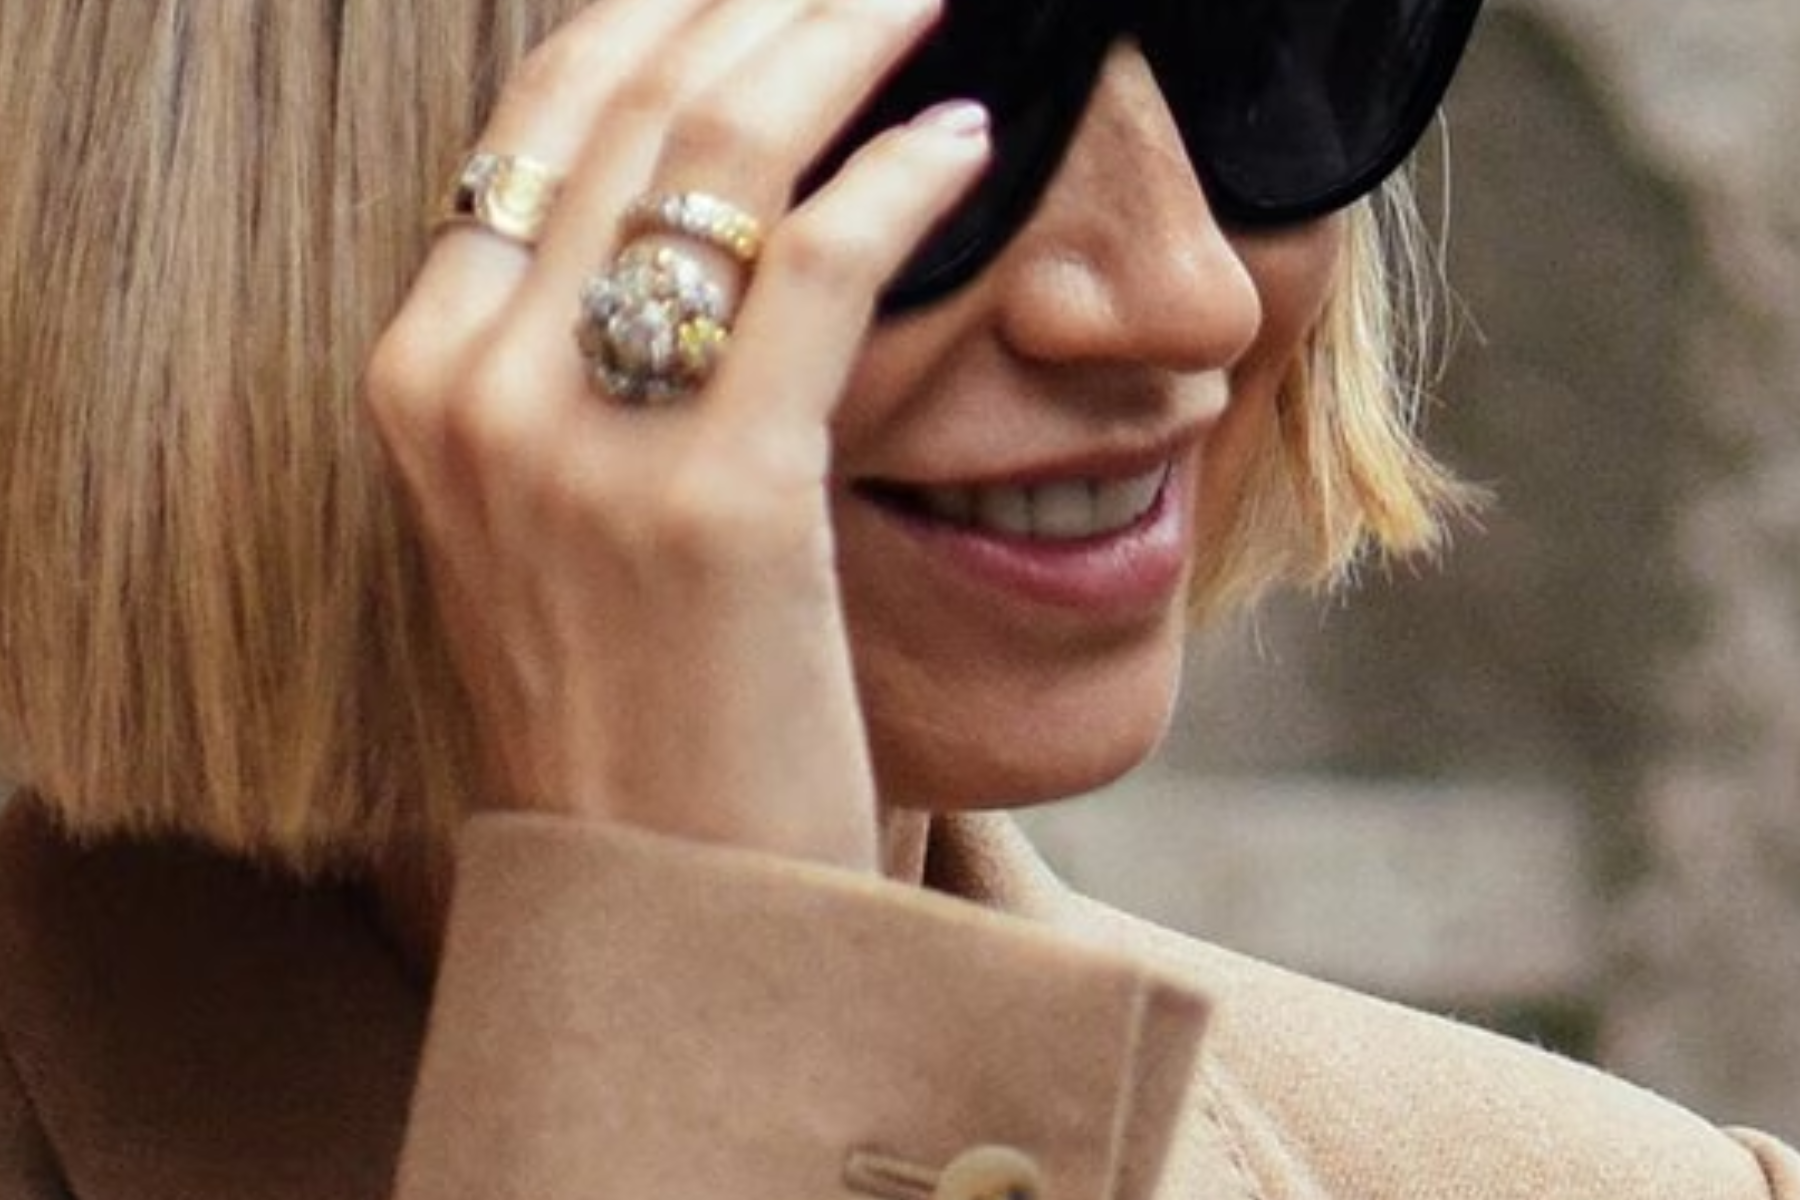 A blonde with short hair wearing cocktail rings